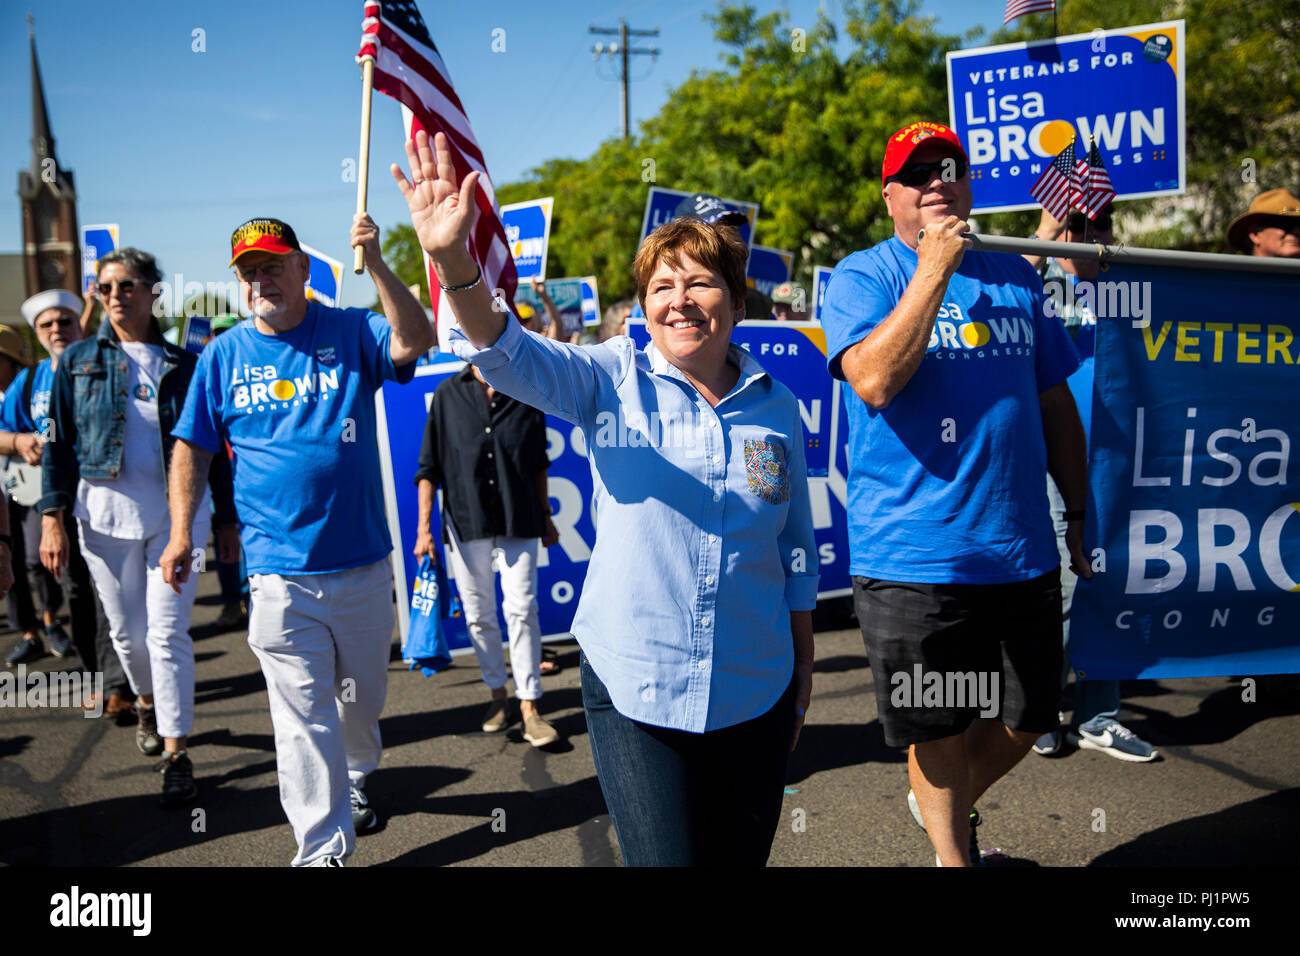 Lisa Brown, a Democratic candidate running to represent Washington's 5th Congressional District, marches with her supporters in the annual Frontier Da Stock Photo